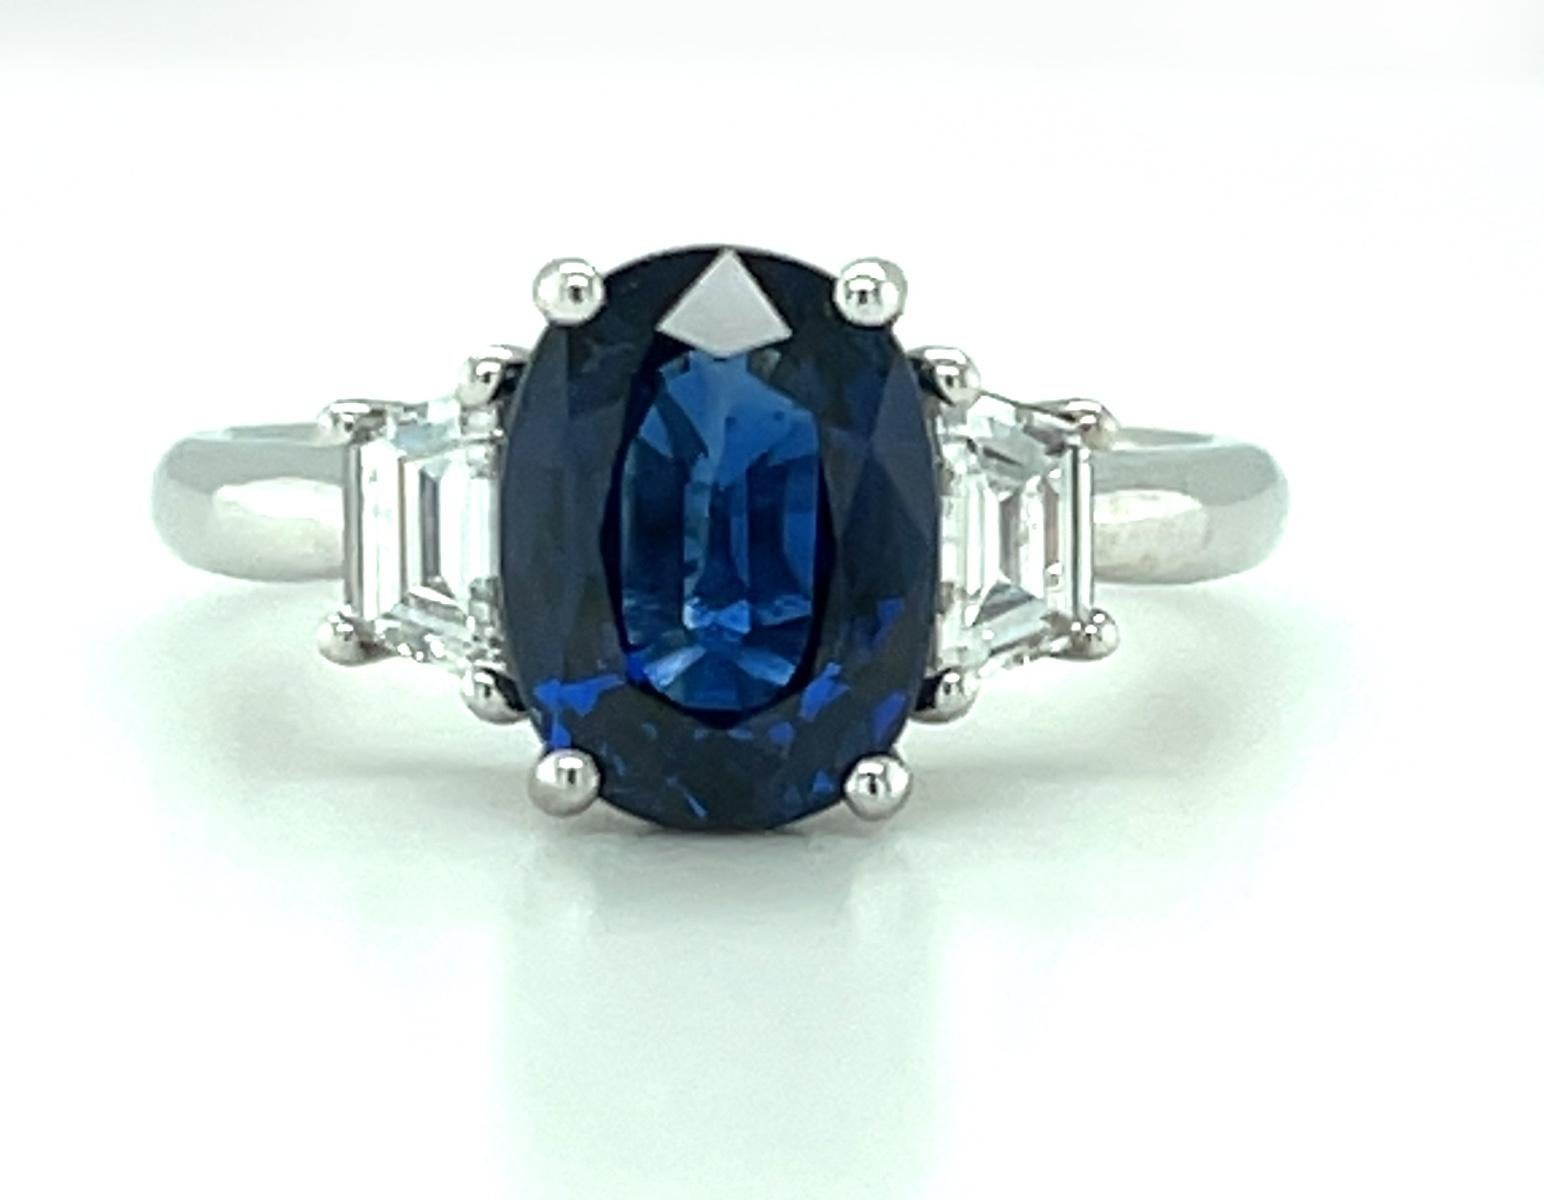 This classic three-stone engagement ring features a beautiful 2.18 carat blue sapphire set in platinum with an exquisite pair of fine diamonds. The sapphire has rich, blue color whose shape is accented beautifully by the trapezoid-shaped side